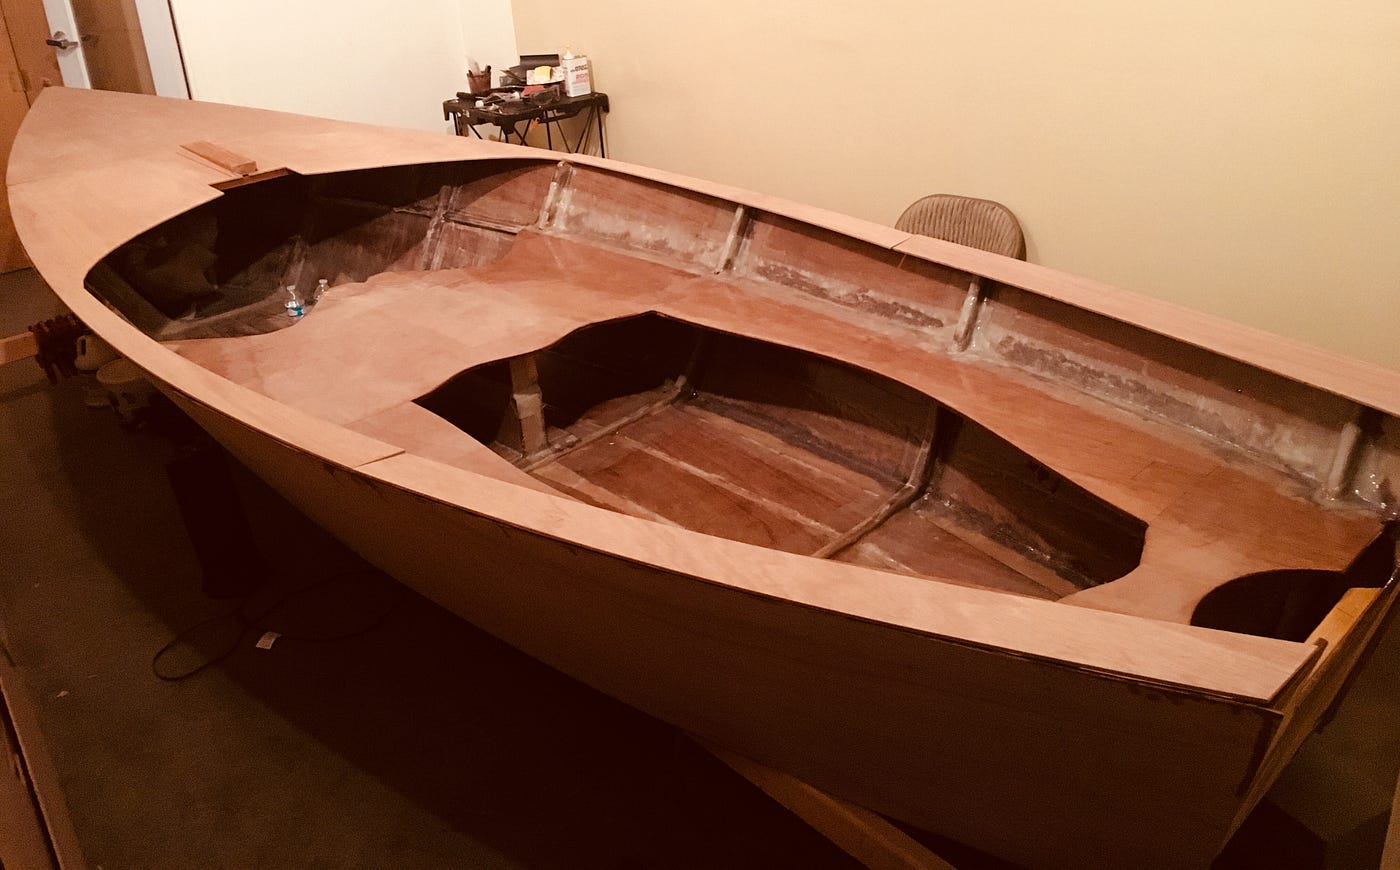 Boat Project: The Big Roll. Three months since the last boat…, by Chris  Sullivan